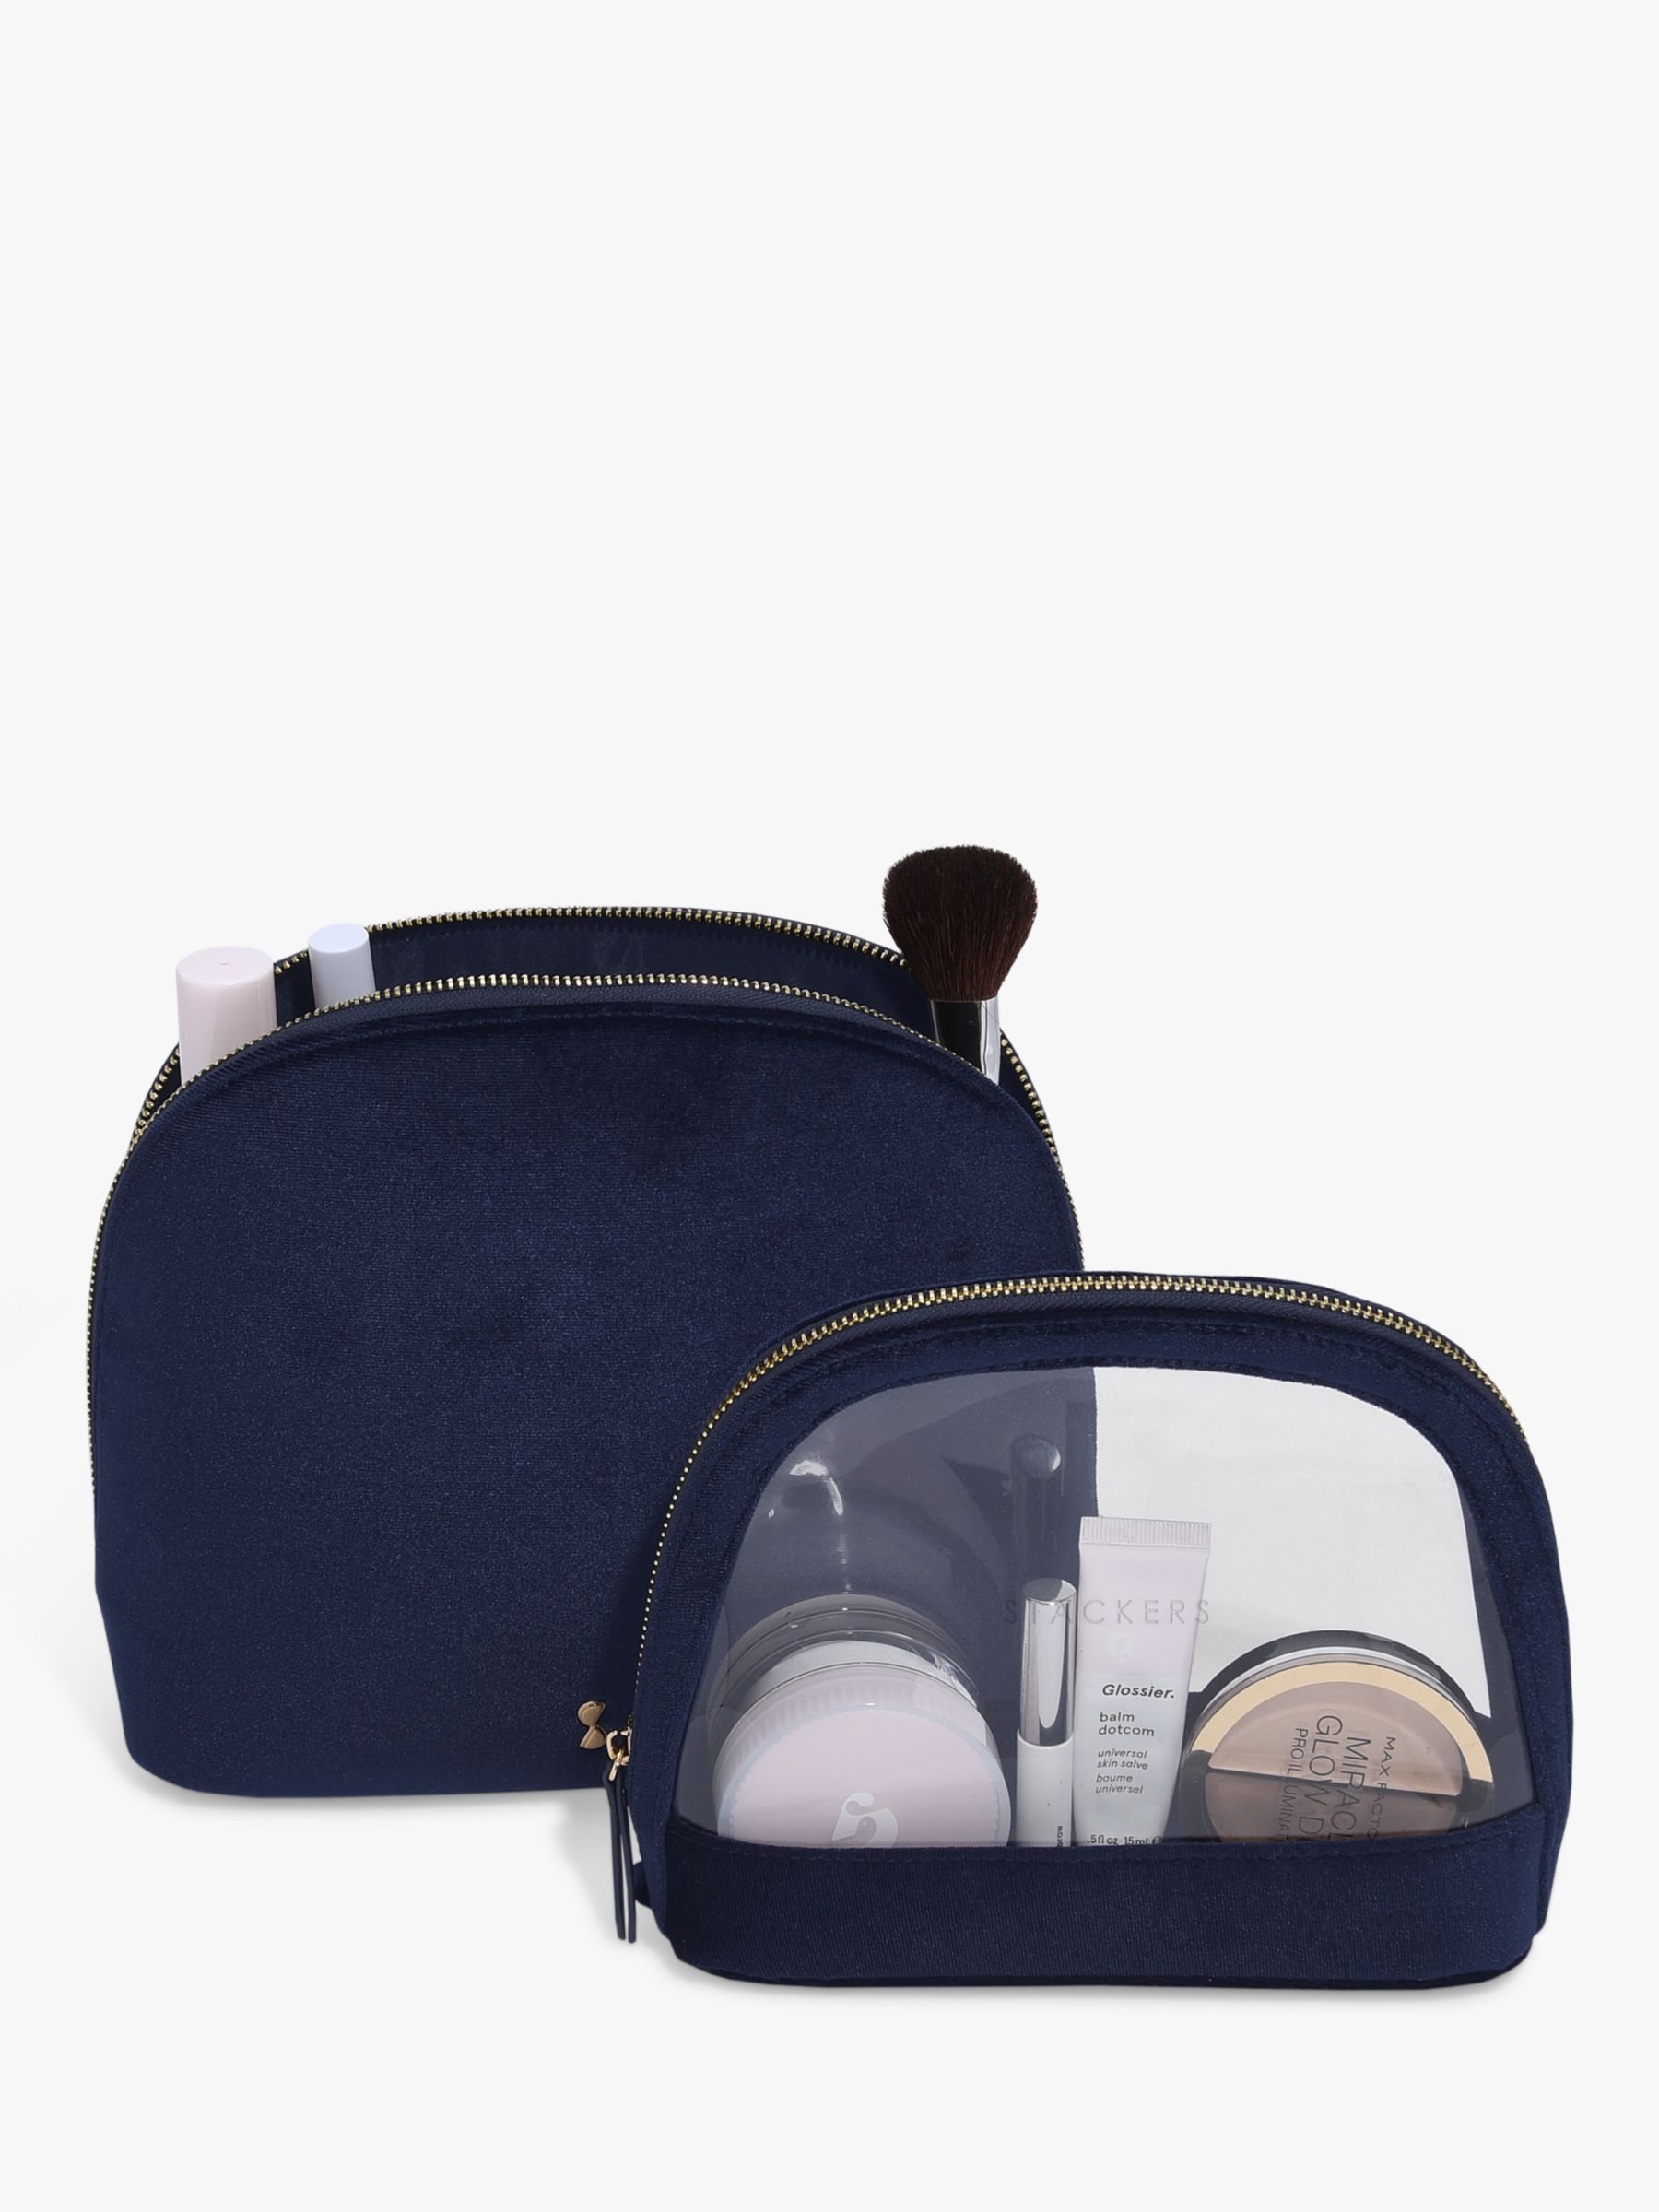 Stackers Curve Cosmetics Bag, Set of 2, Navy 1